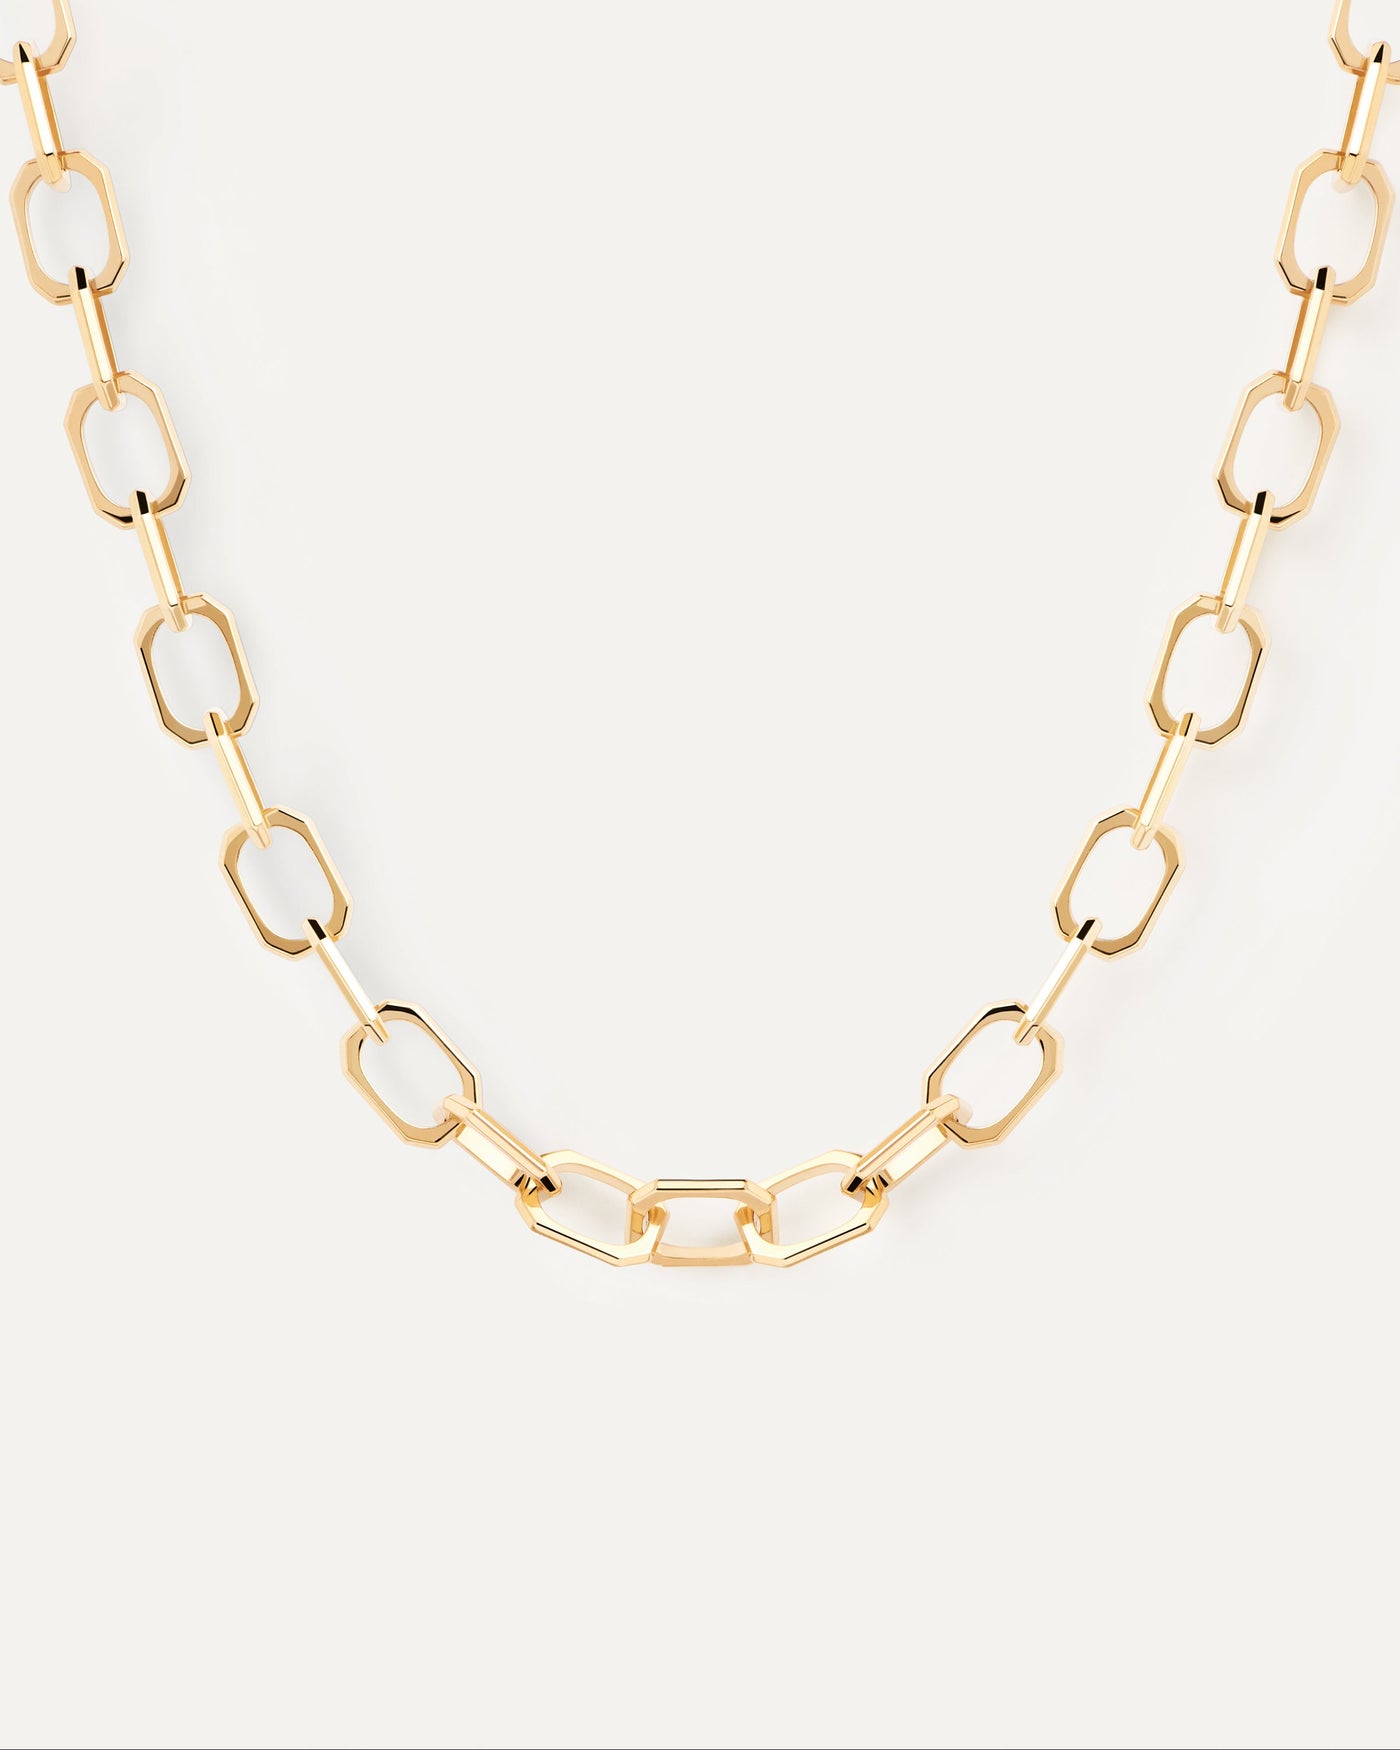 2023 Selection | Small Signature Chain Necklace. Cable chain necklace with octogonal links in 18K gold plating. Get the latest arrival from PDPAOLA. Place your order safely and get this Best Seller. Free Shipping.